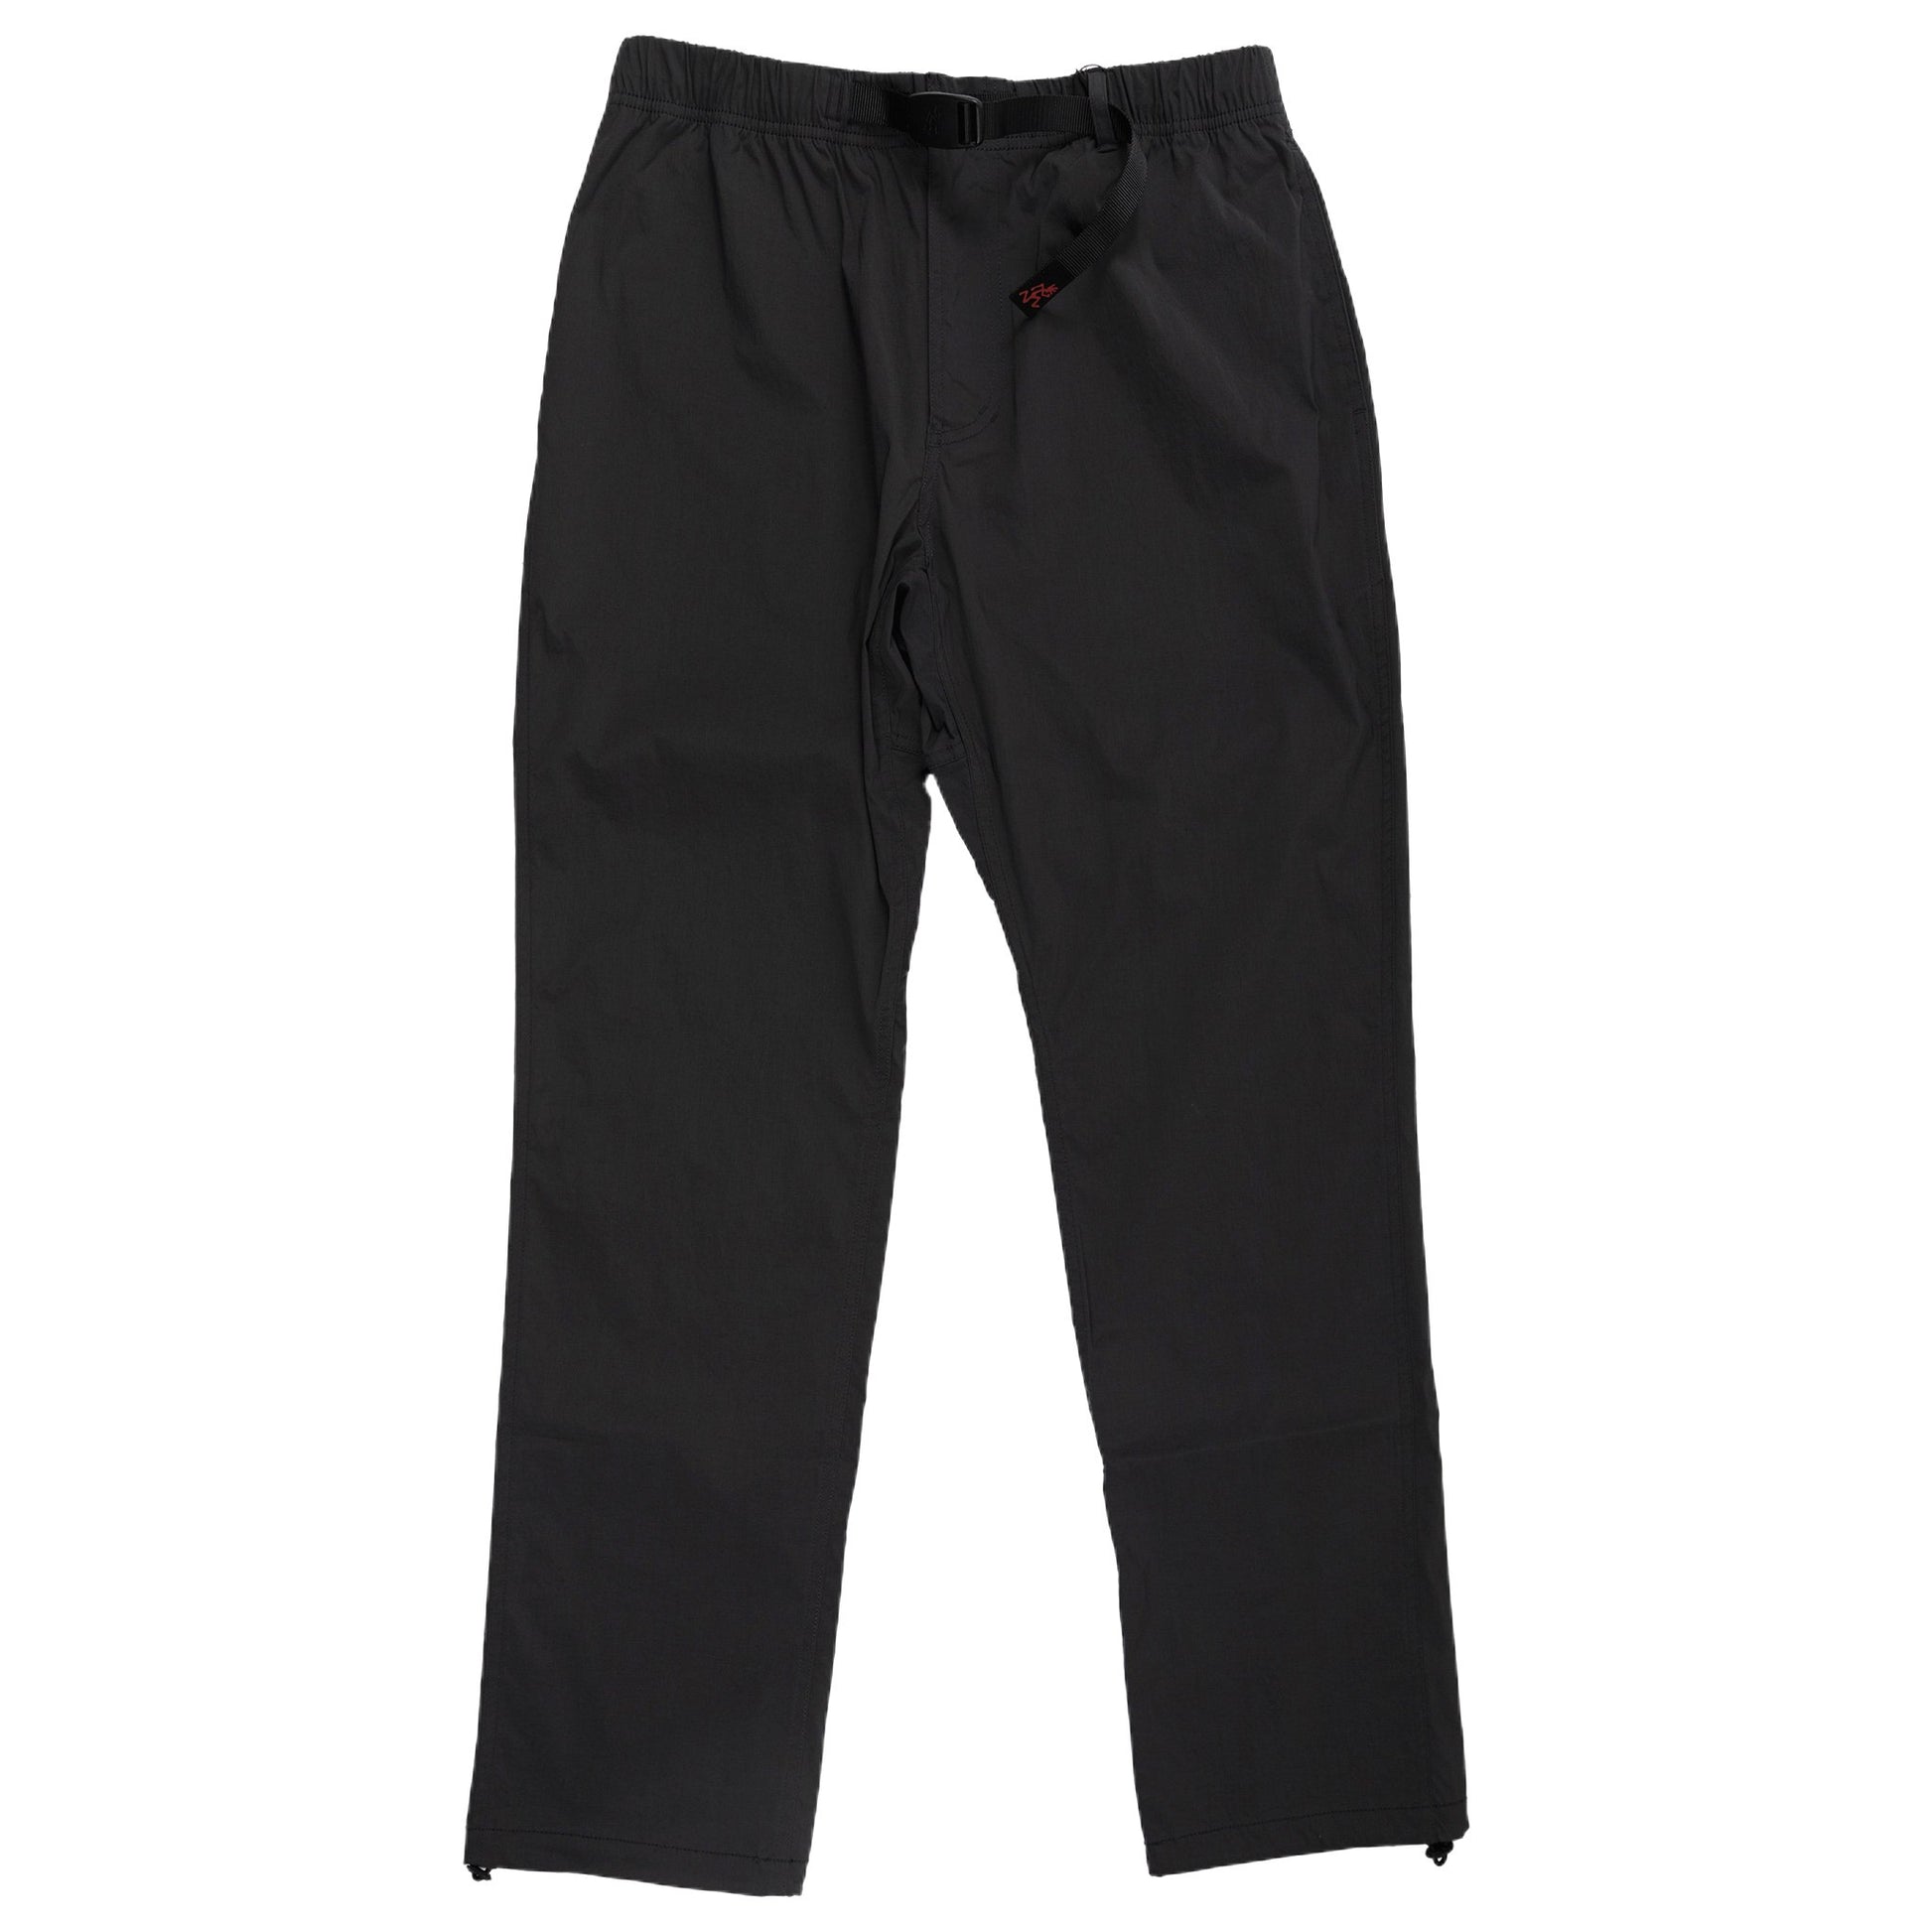 Gramicci Whitney Cordura Pant in Black rain gear all weather front